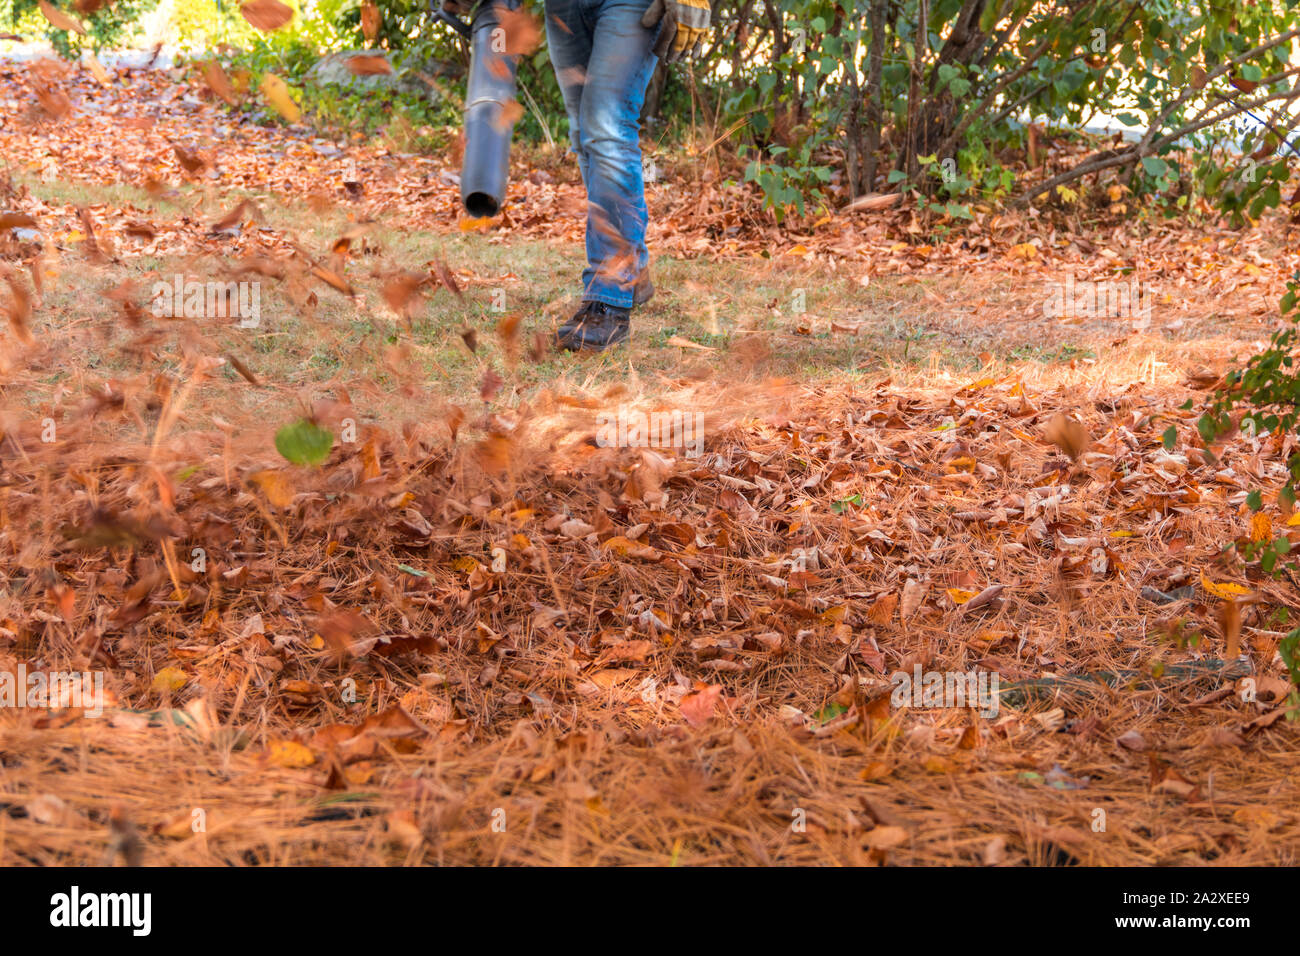 Leaf blower in action moving colorful fall leaves and pine needles from residential lawn with intentional motion blur Stock Photo